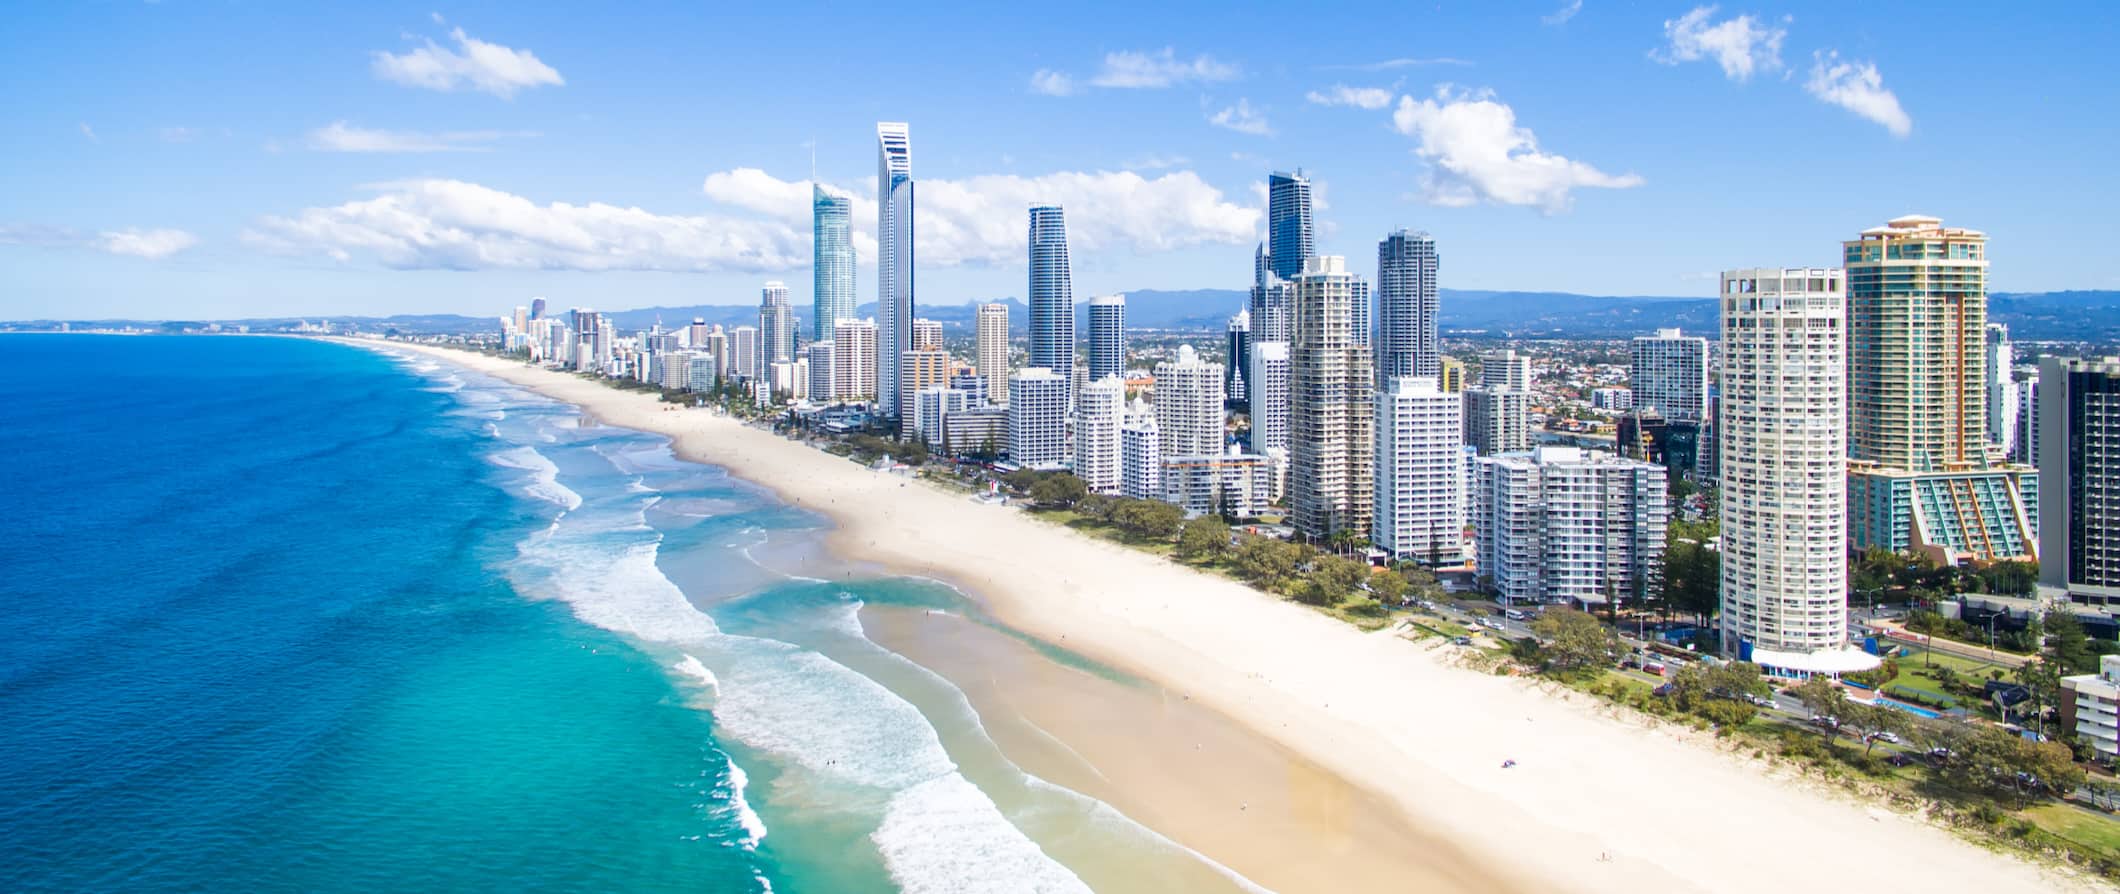 An aerial view of the stunning highrises along the beach in Gold Coast, Australia